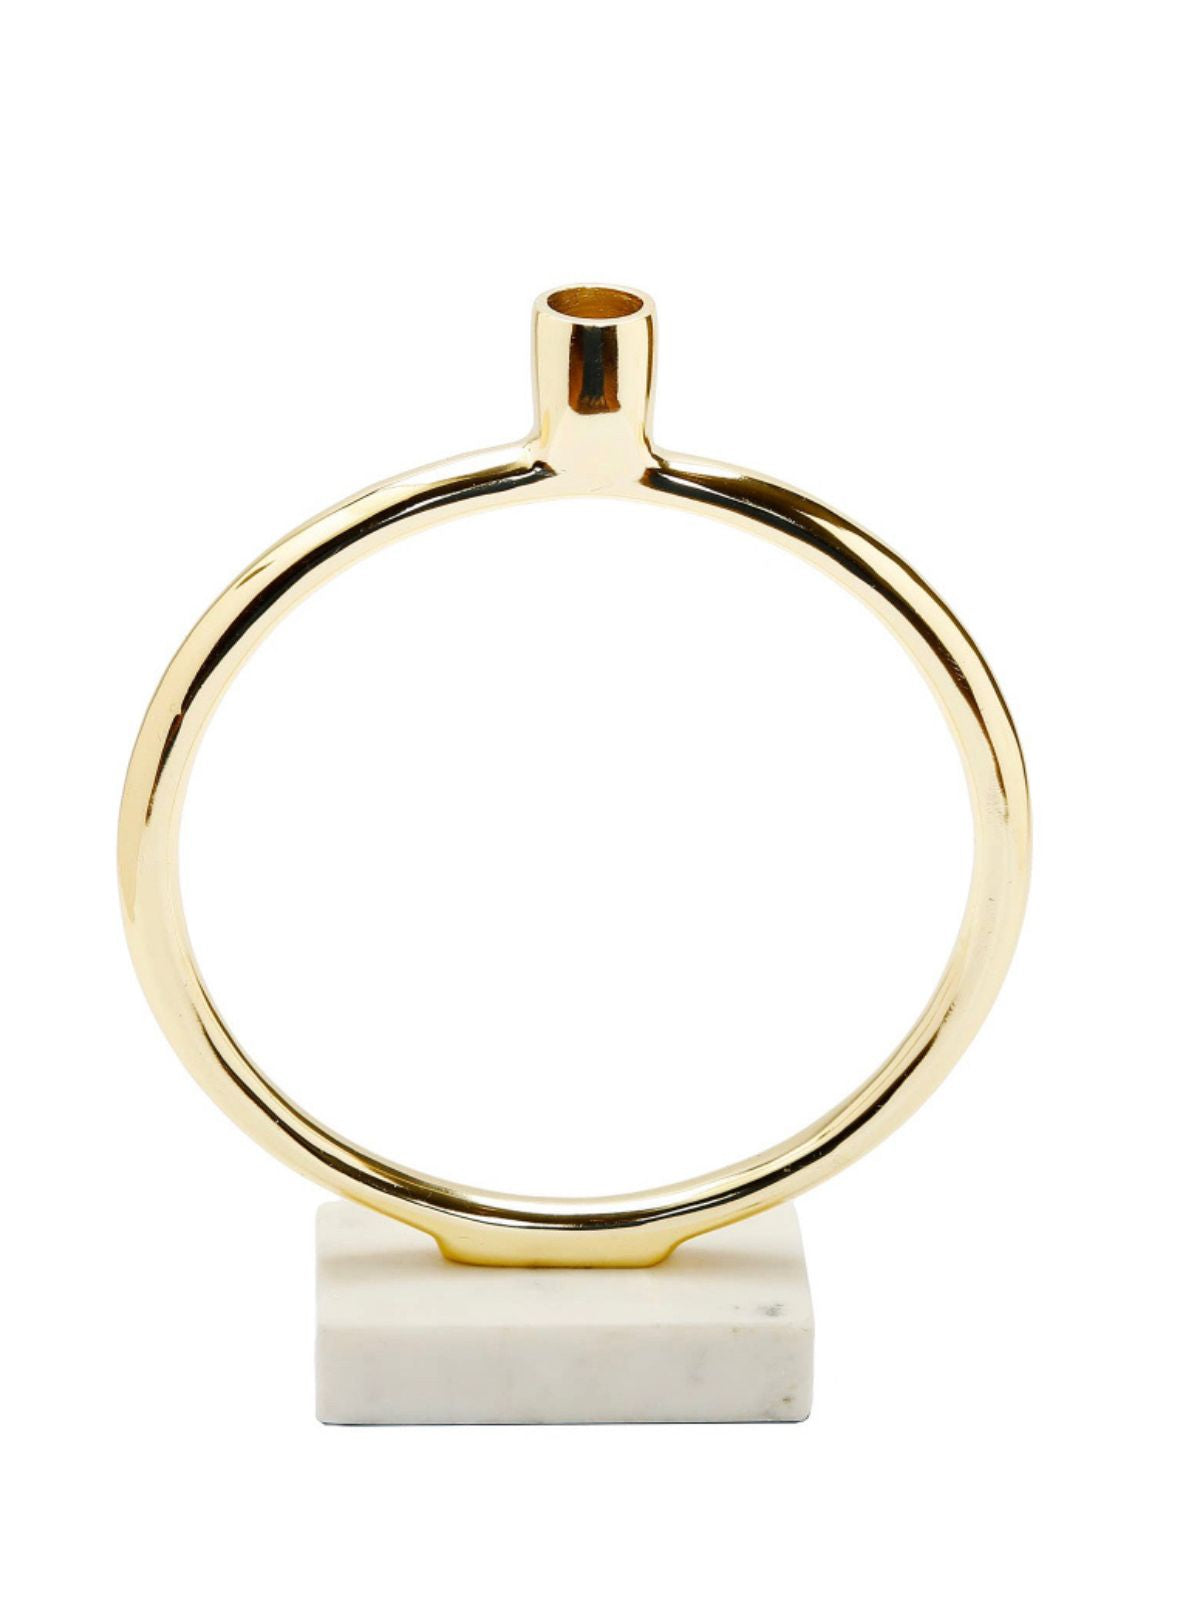 9.75H Gold Metal Circular Taper Candle Holder on Marble Base. Sold by KYA Home Decor.